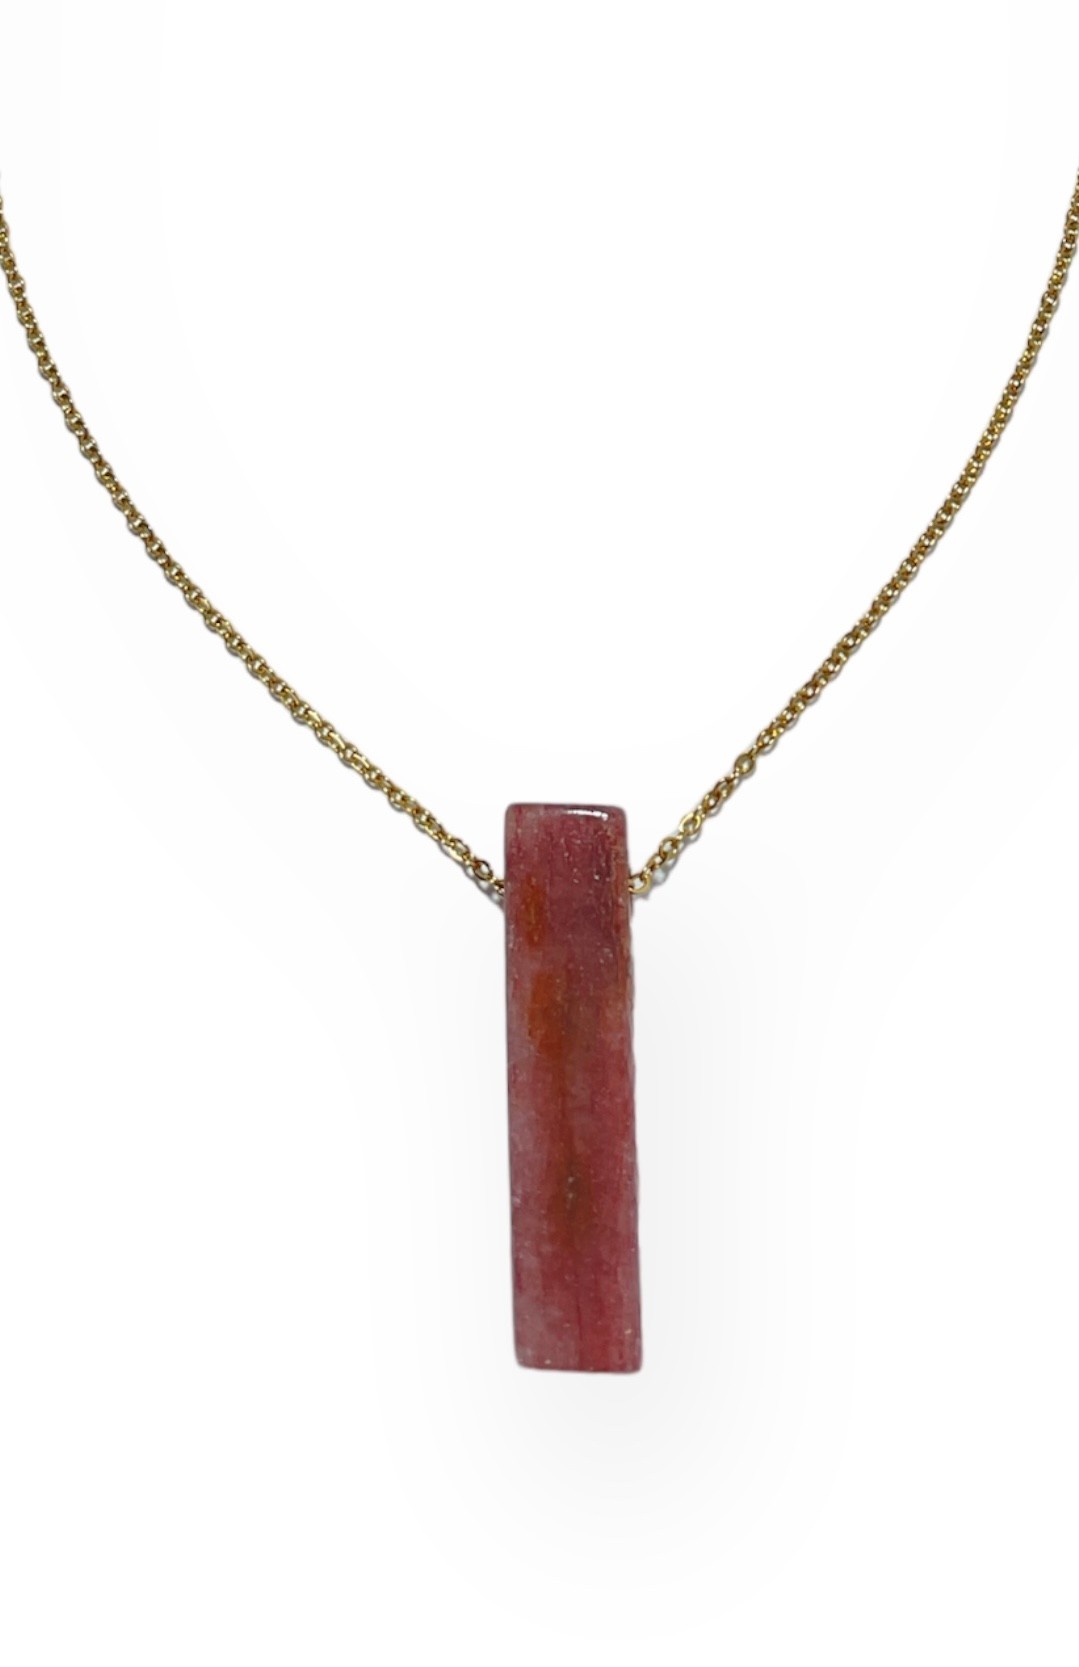  Pink Strawberry Quartz,18k gold plated natural stone necklace on steel